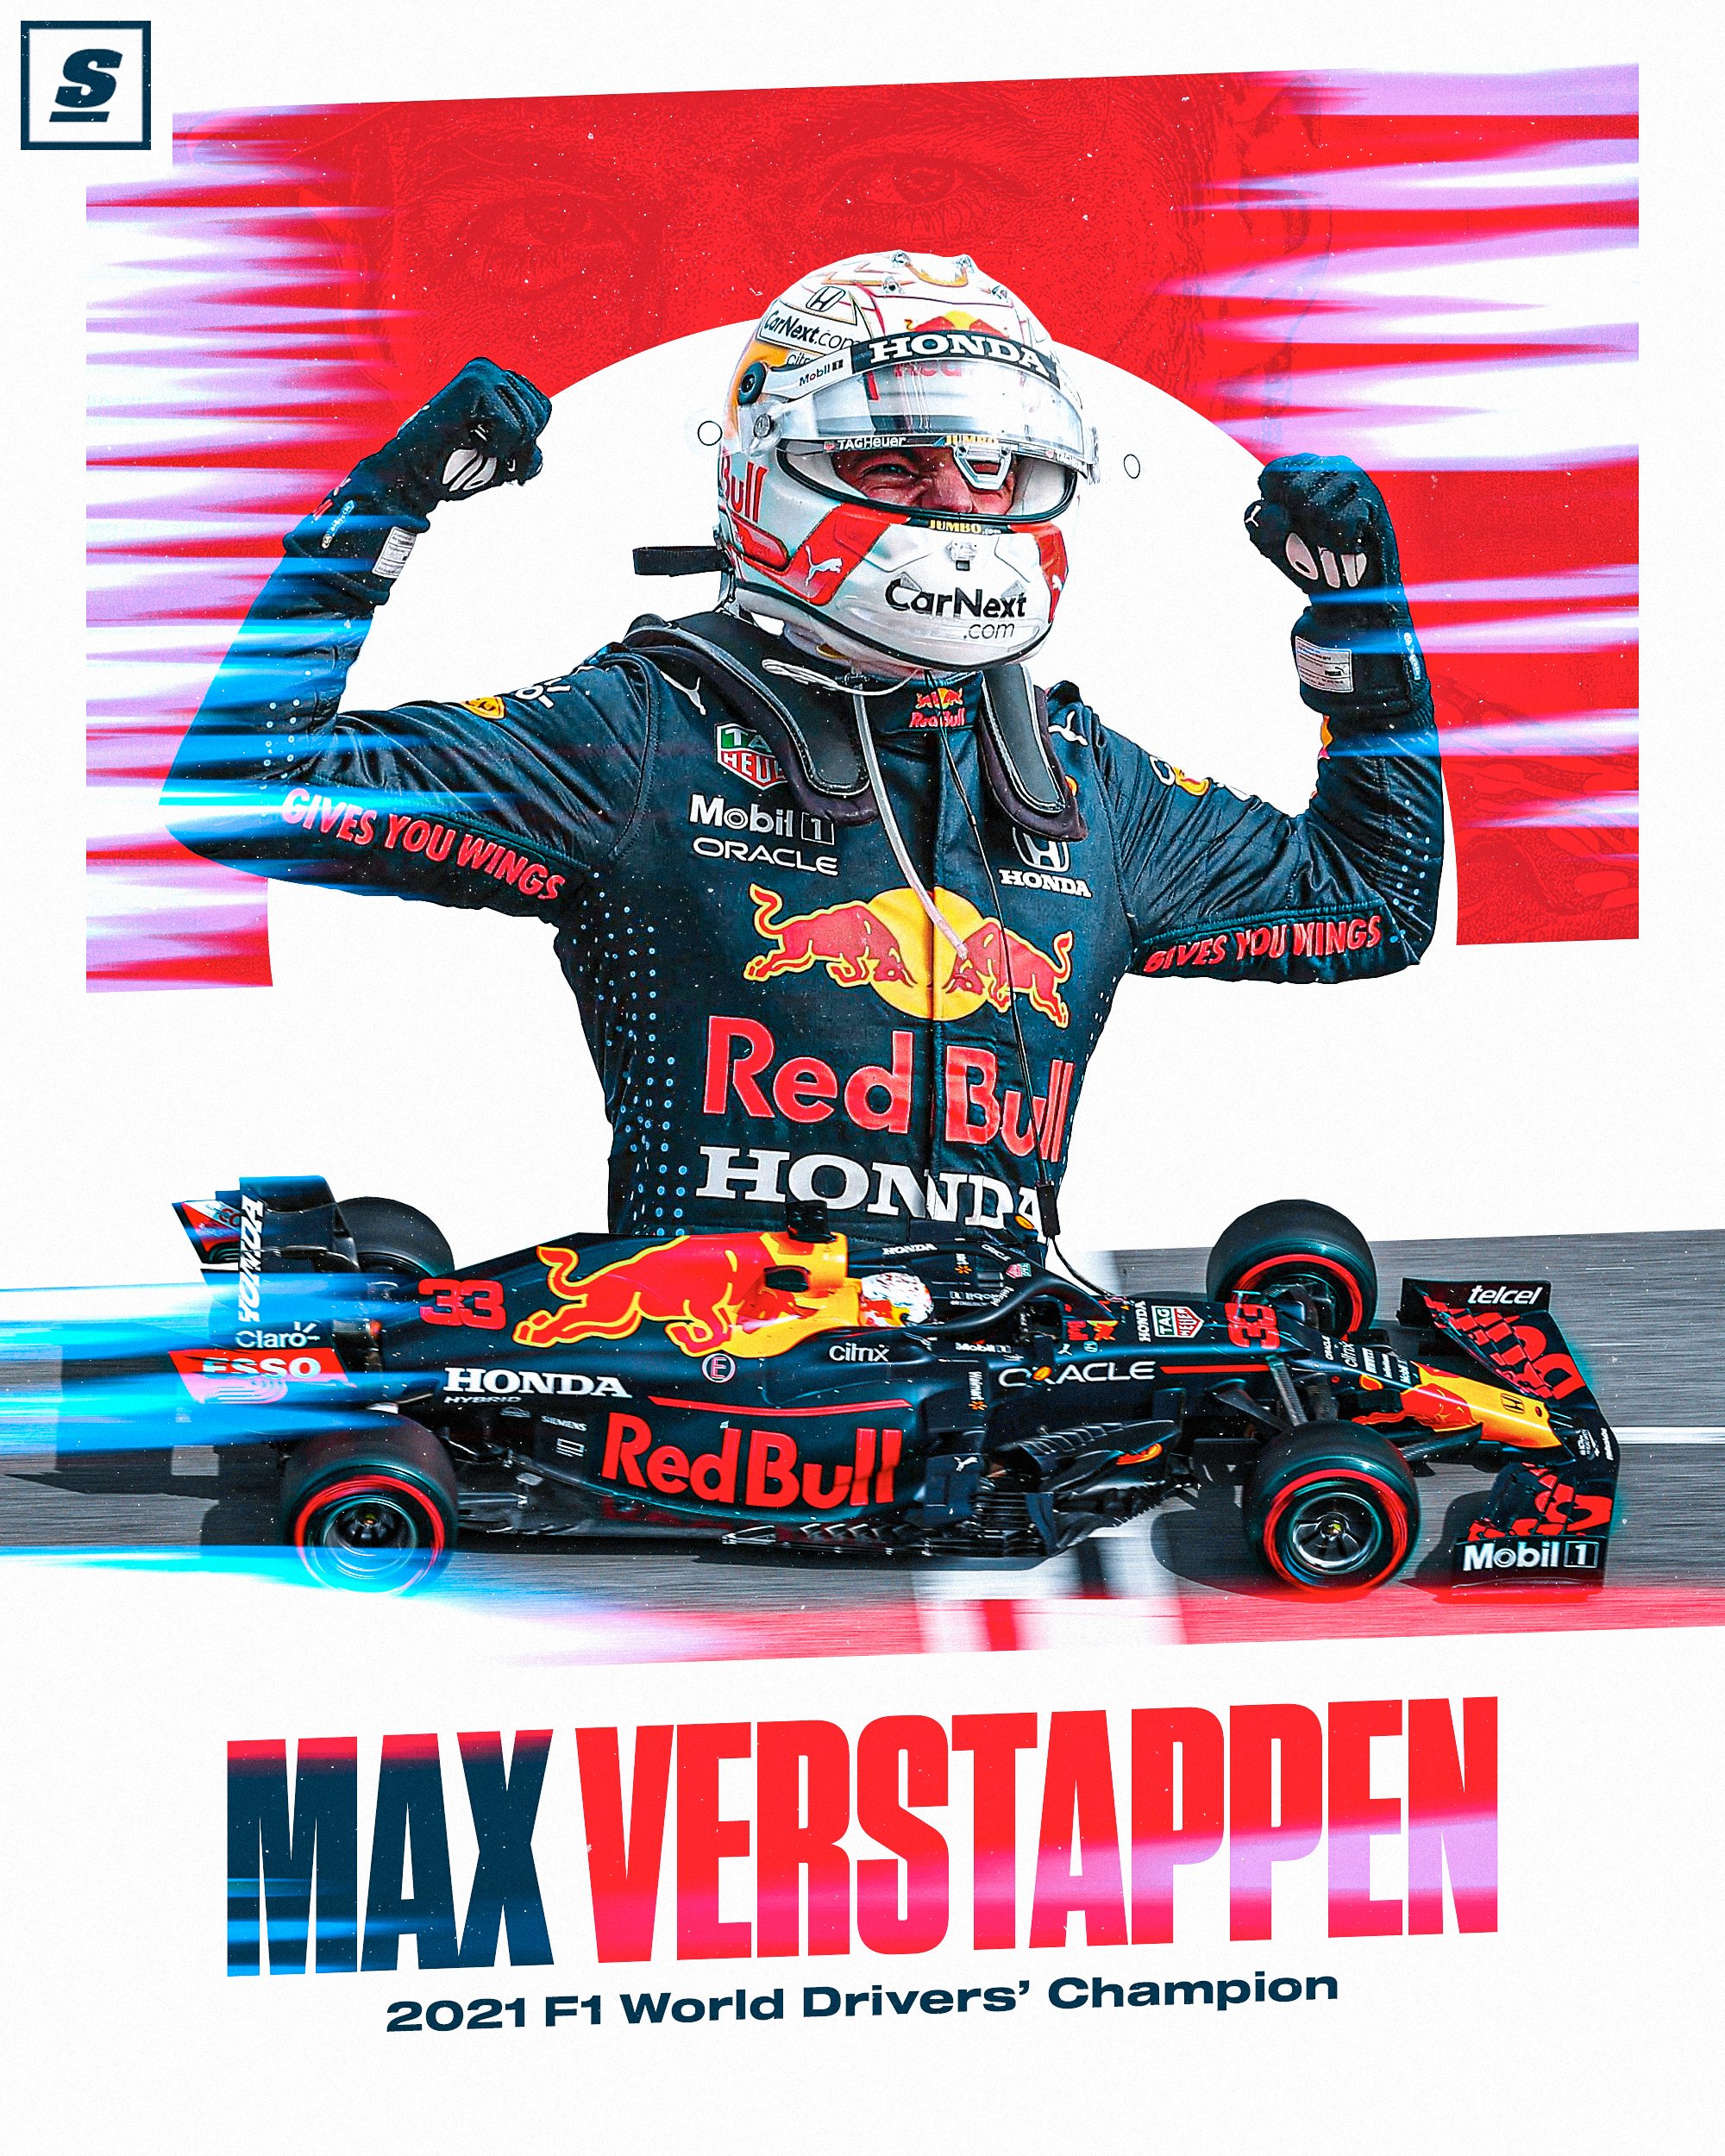 theScore VERSTAPPEN GETS BY LEWIS ON THE FINAL LAP AND CLAMS HIS 1ST F1 WORLD CHAMPIONSHIP!